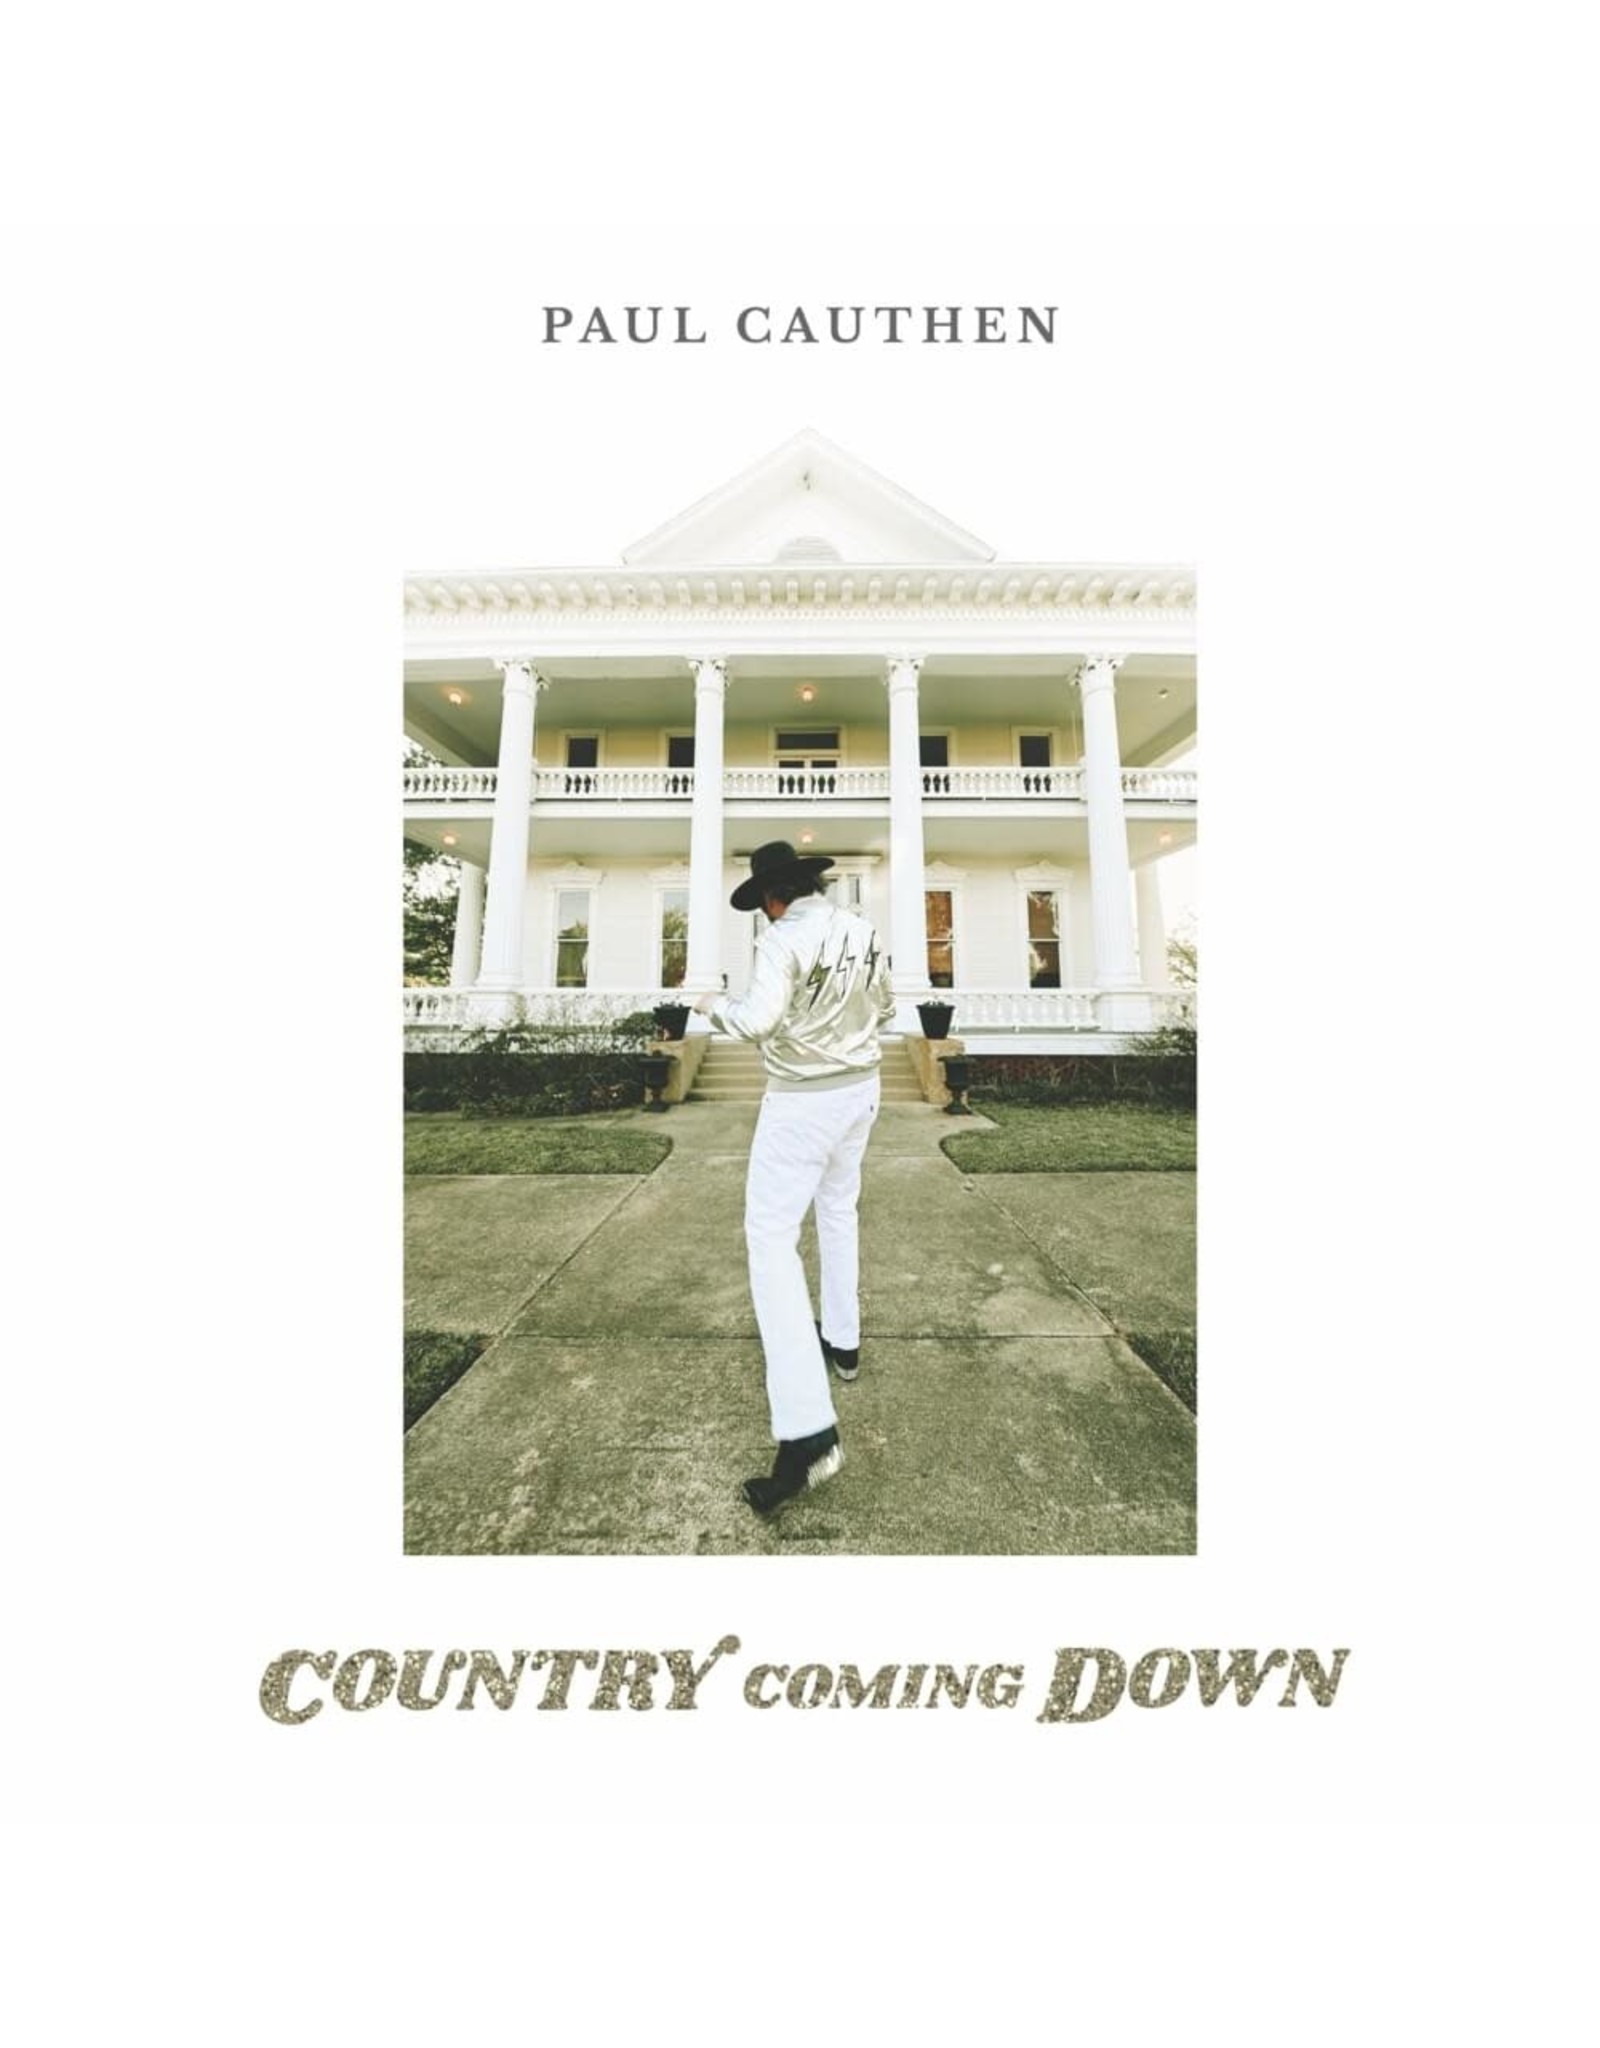 Paul Cauthen - Country Coming Down (Exclusive White Vinyl)